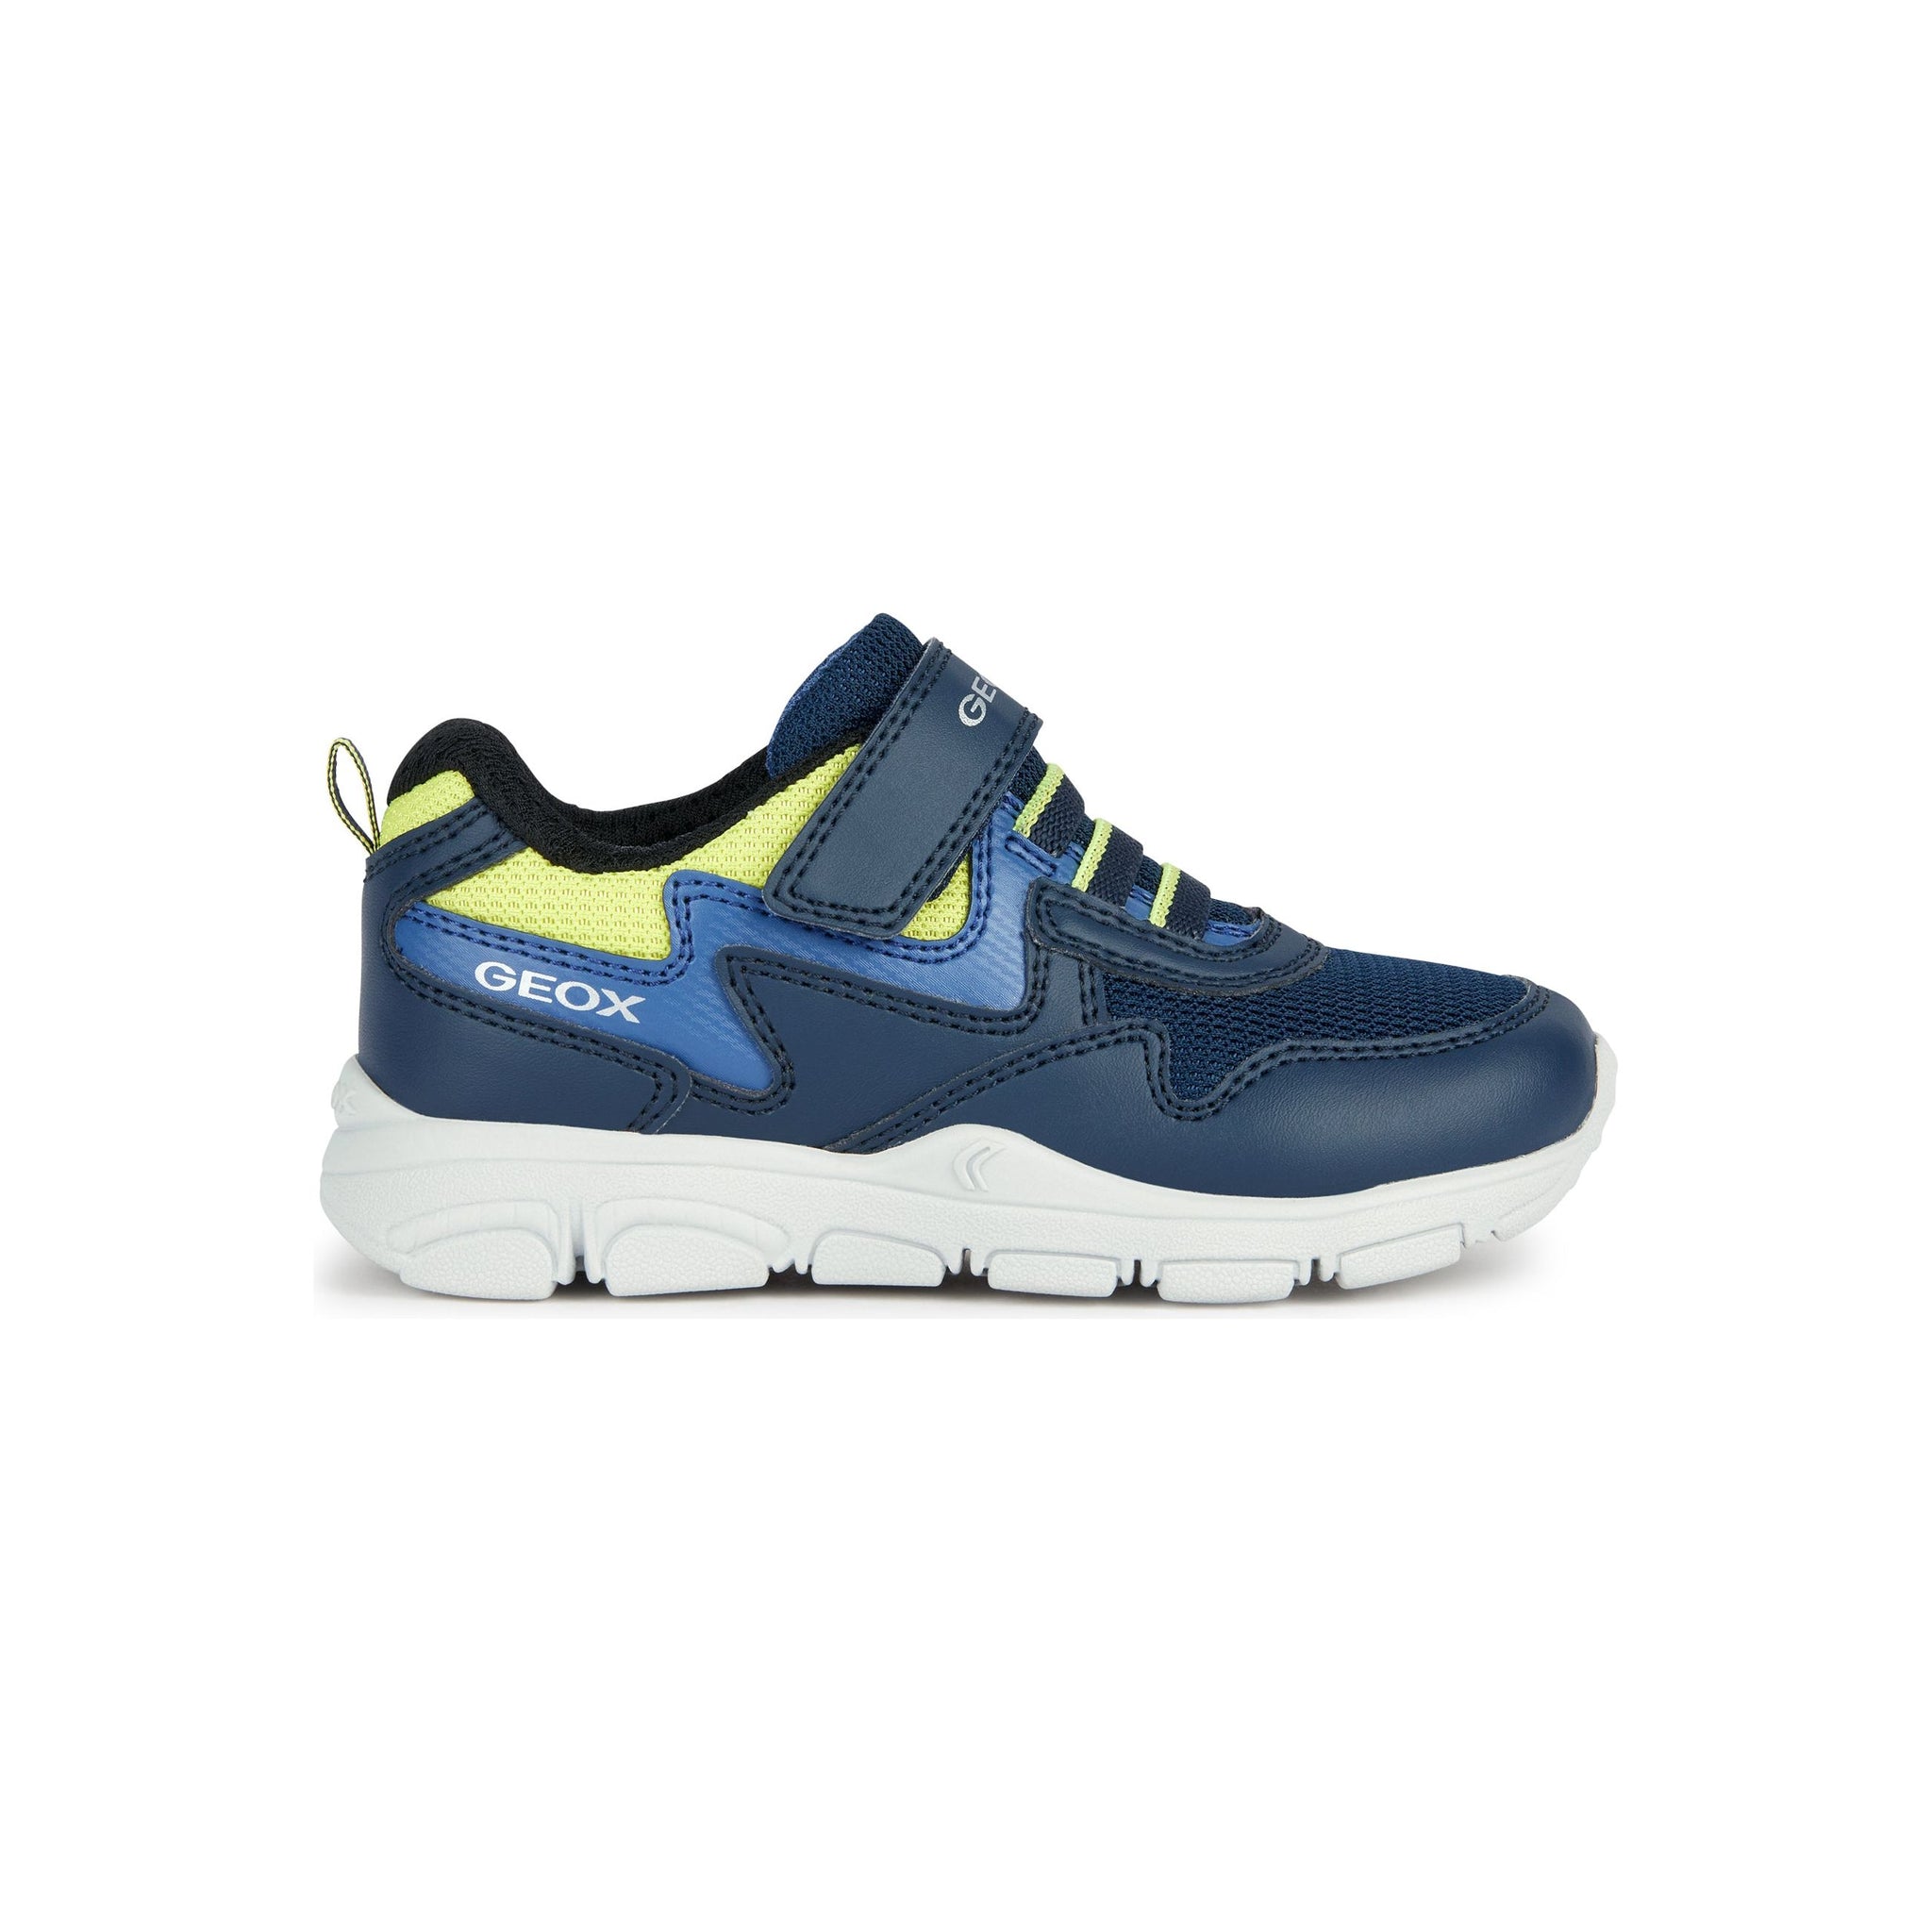 Geox Torque (J267NA) - Kids Velcro Trainer in Navy/Lime | Geox Shoes | Childrens Shoe Fitting | Wisemans | Bantry | West Cork | Ireland